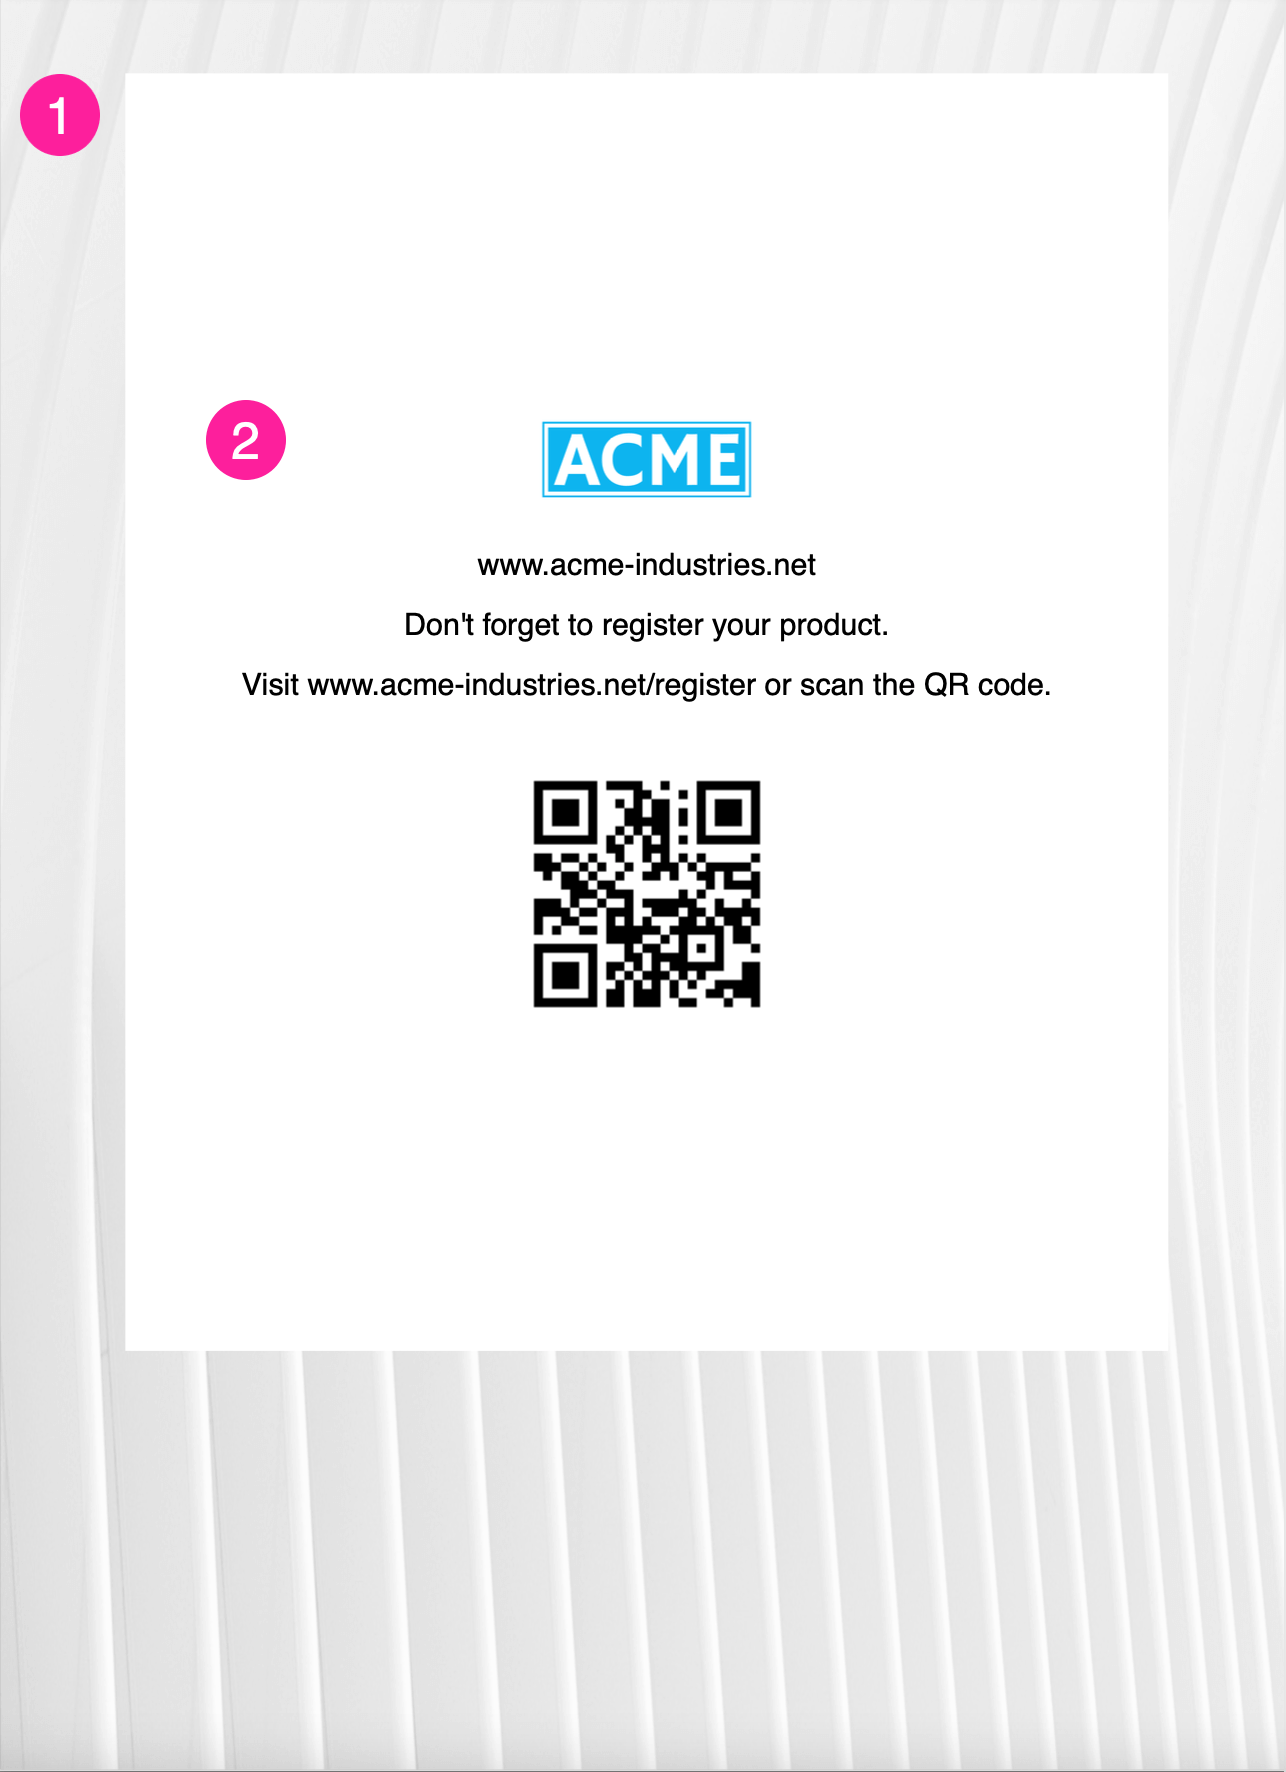 Example of the inside of a back cover. The background is an image with an abstract pattern and it is labelled 1. There is a white content box containing a logo, text, and a QR code and this is labelled 2.